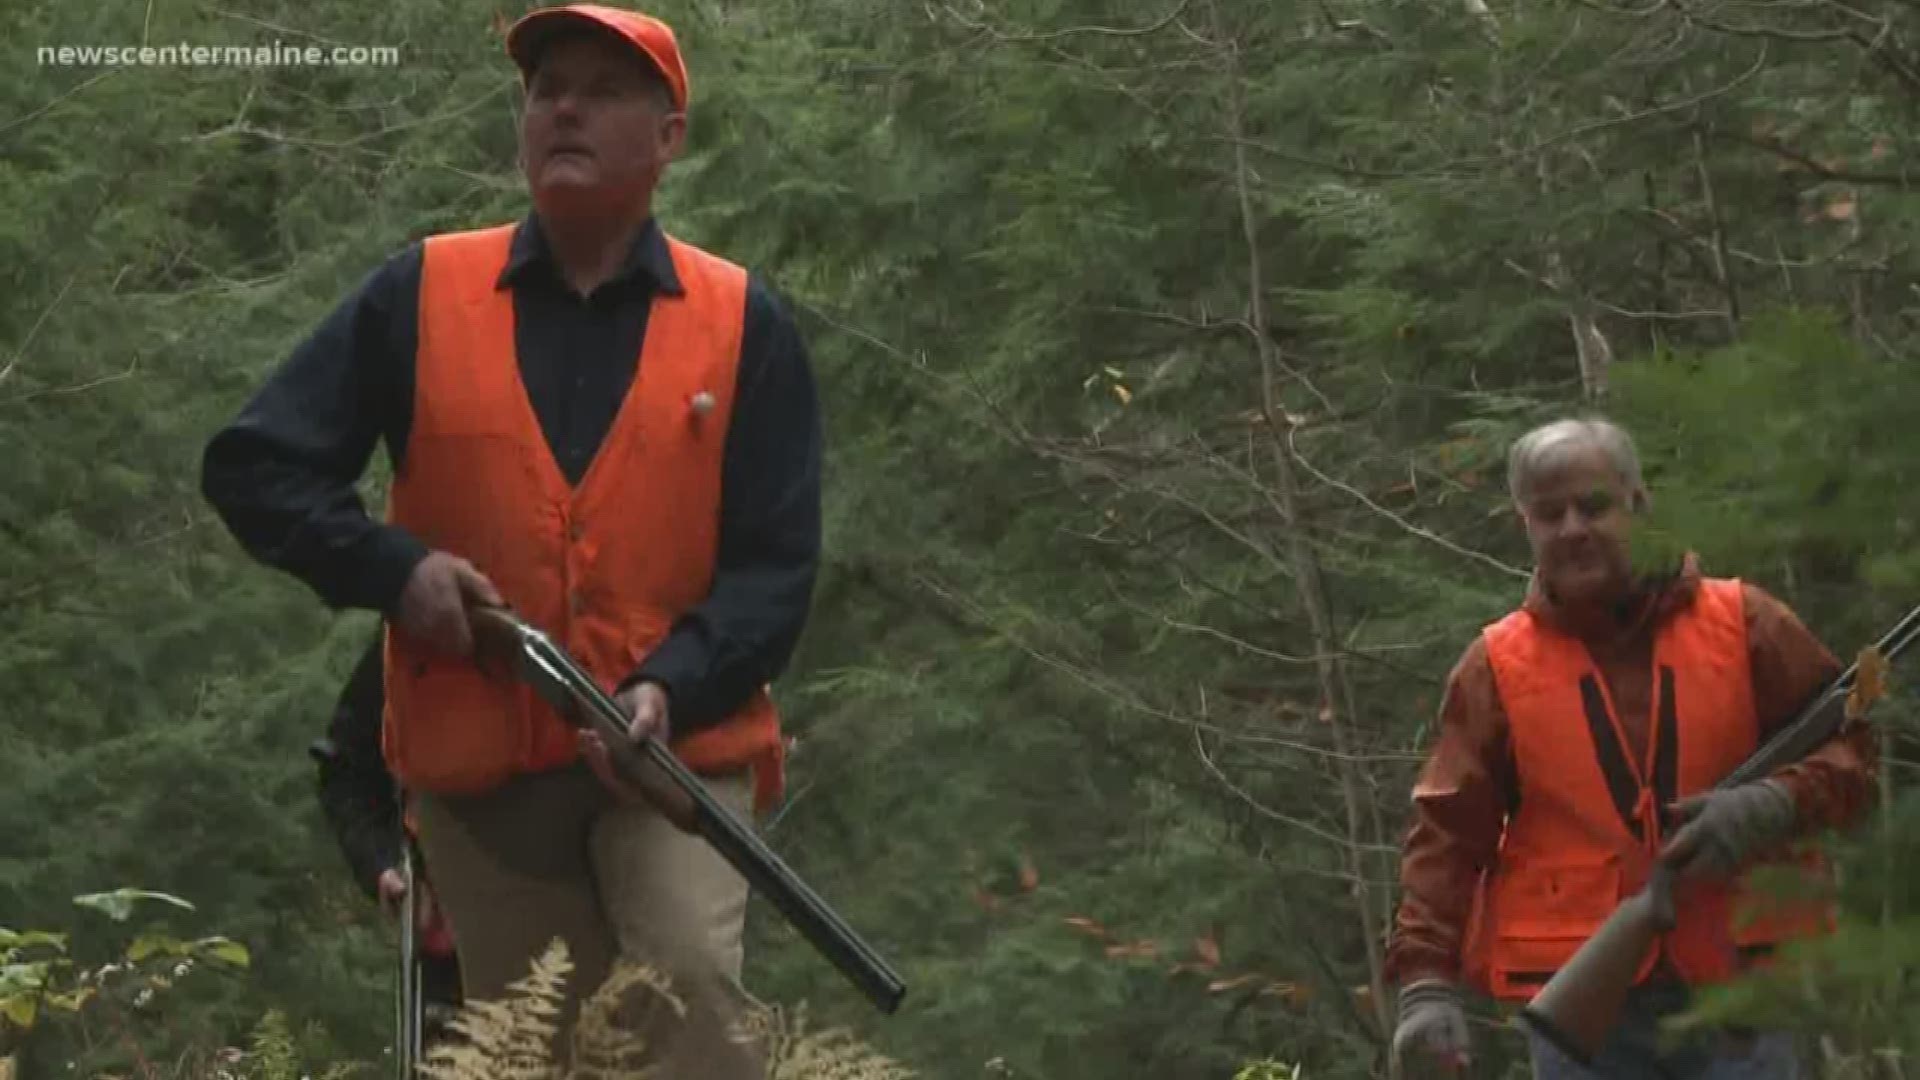 Maine small game hunting season is now underway. People are allowed to hunt gray squirrels and snowshoe hares.